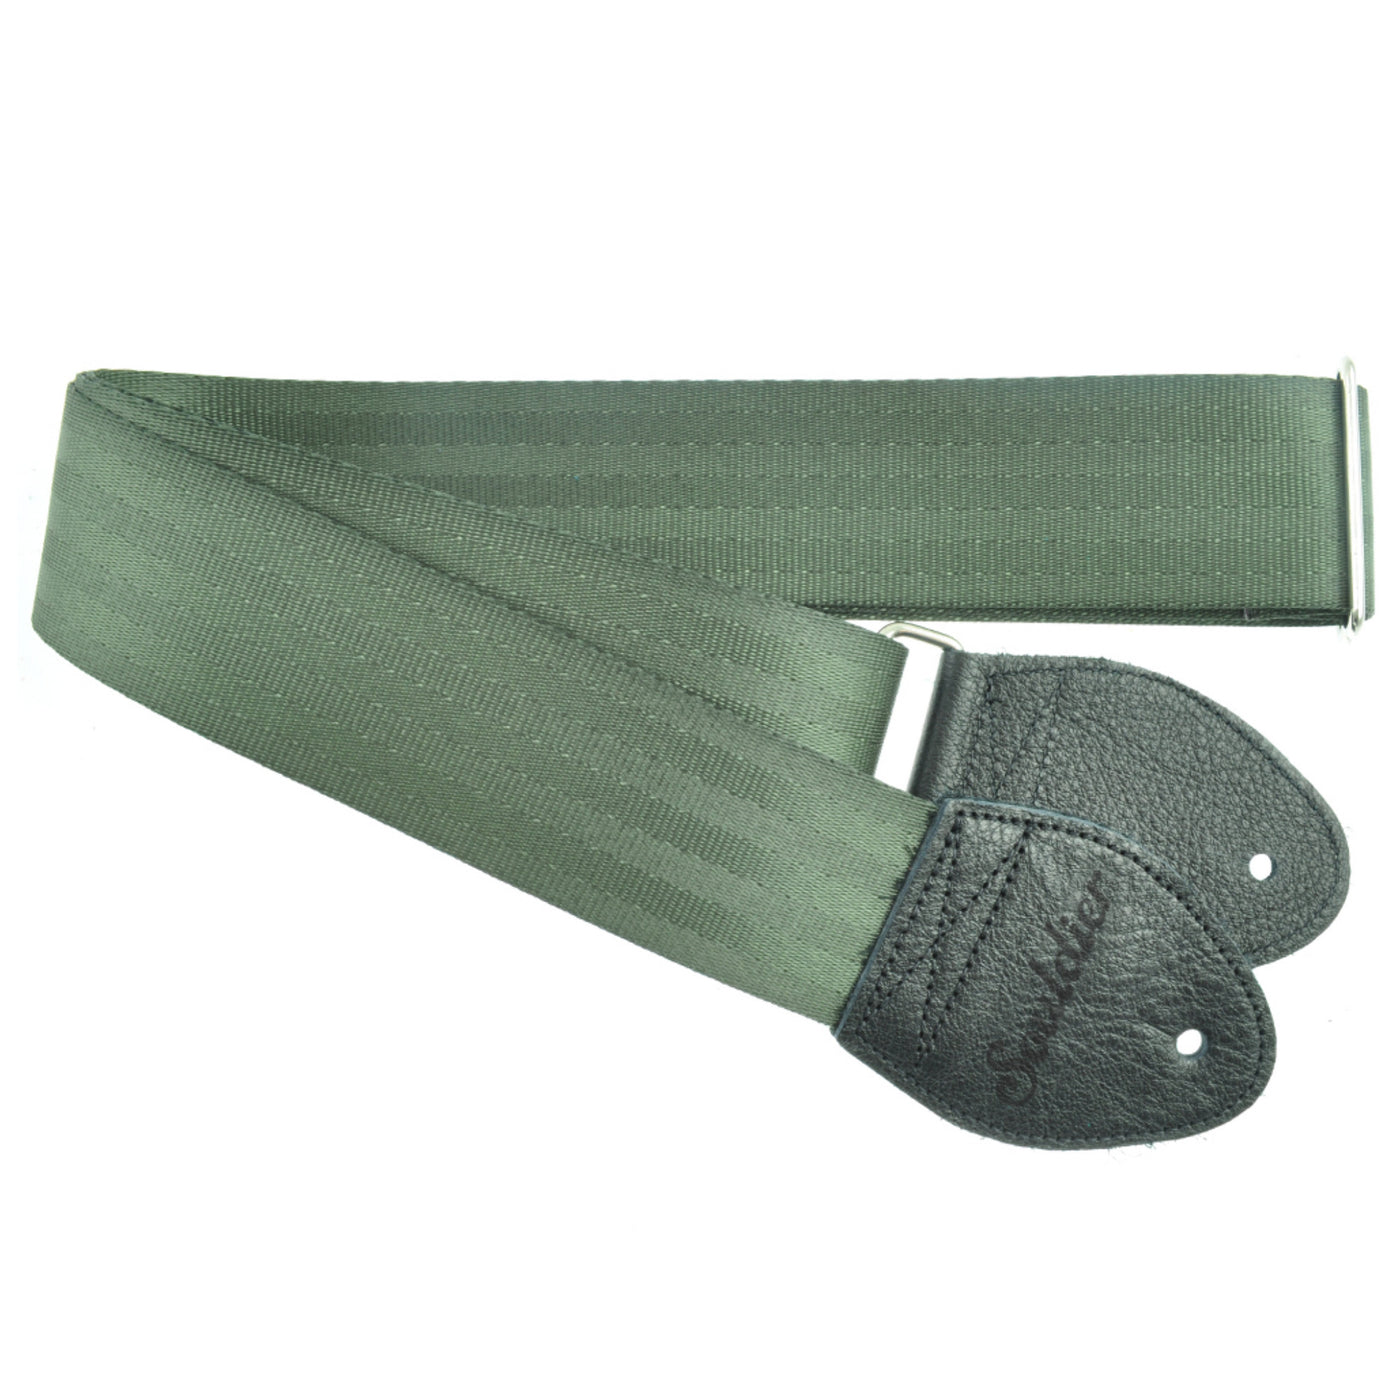 Souldier GS0000FG04BK - Handmade Seatbelt Guitar Strap for Bass, Electric or Acoustic Guitar, 2 Inches Wide and Adjustable Length from 30" to 63"  Made in the USA, Forest Green